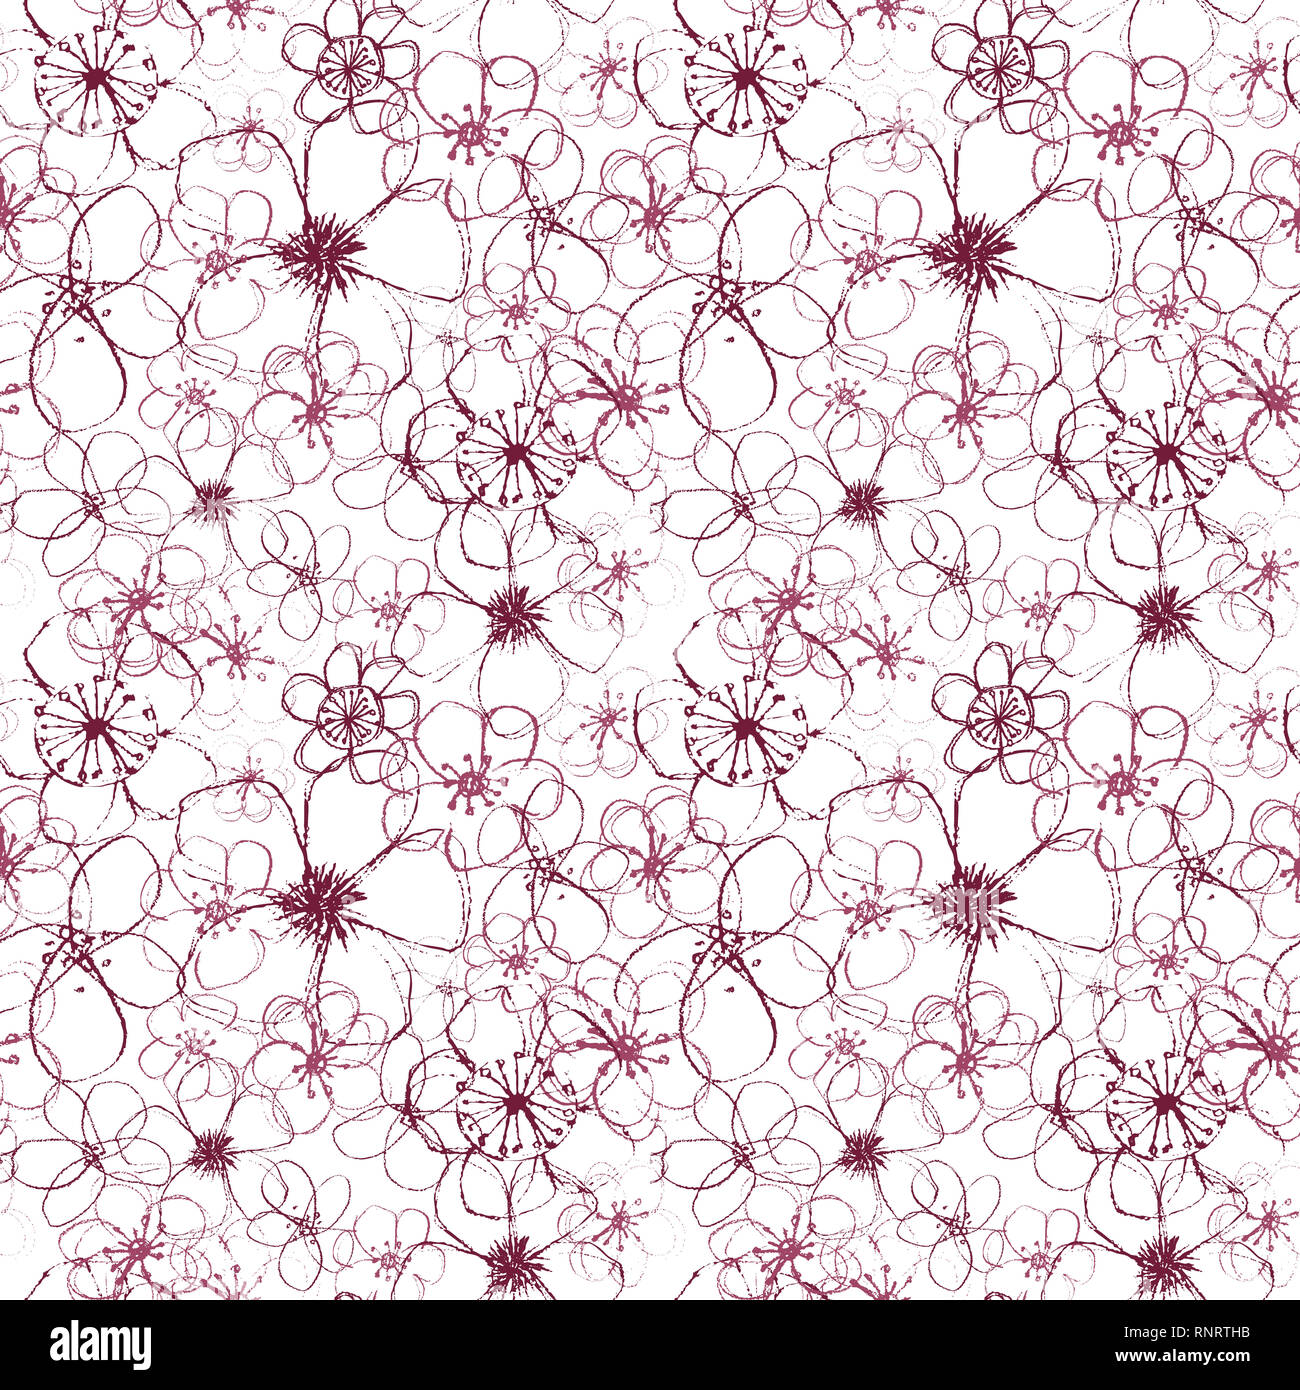 Seamless floral sophistiqué abstract pattern Banque D'Images